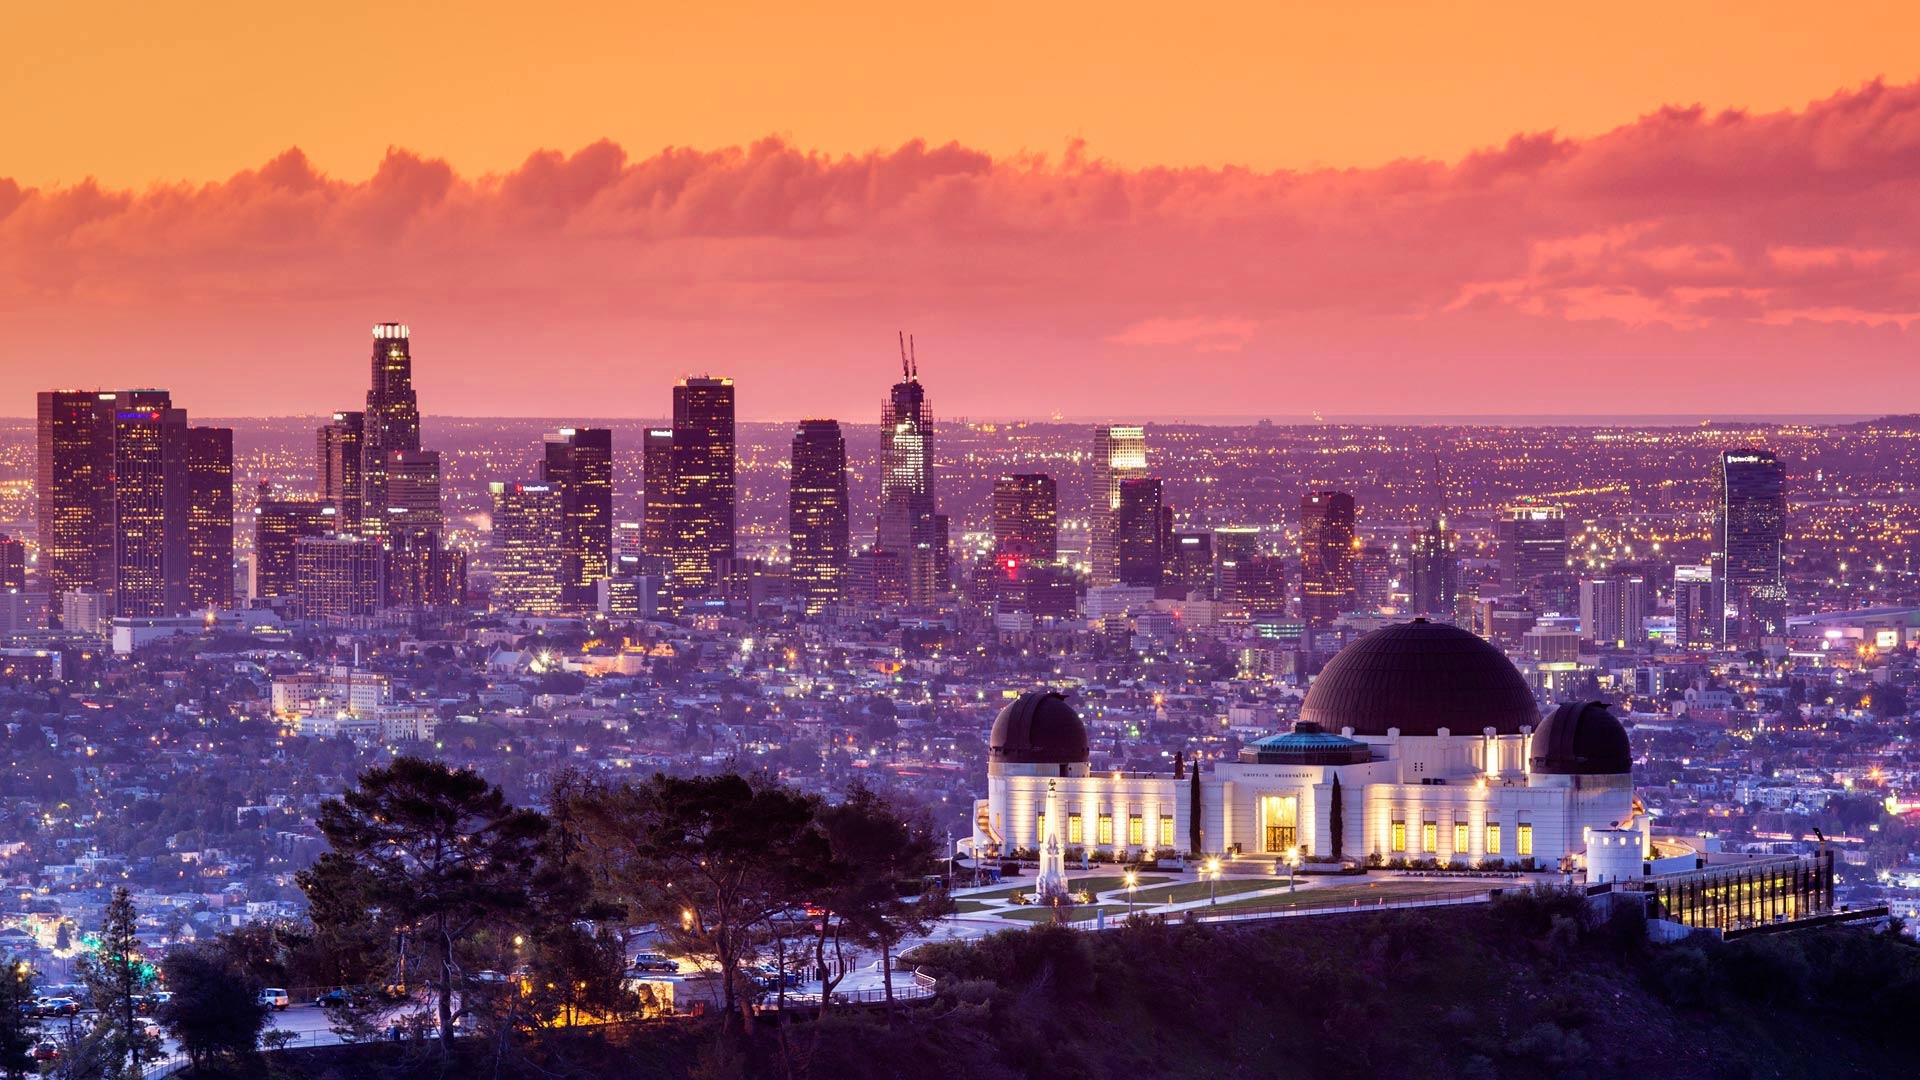 Griffith Observatory Wallpaper Image Group